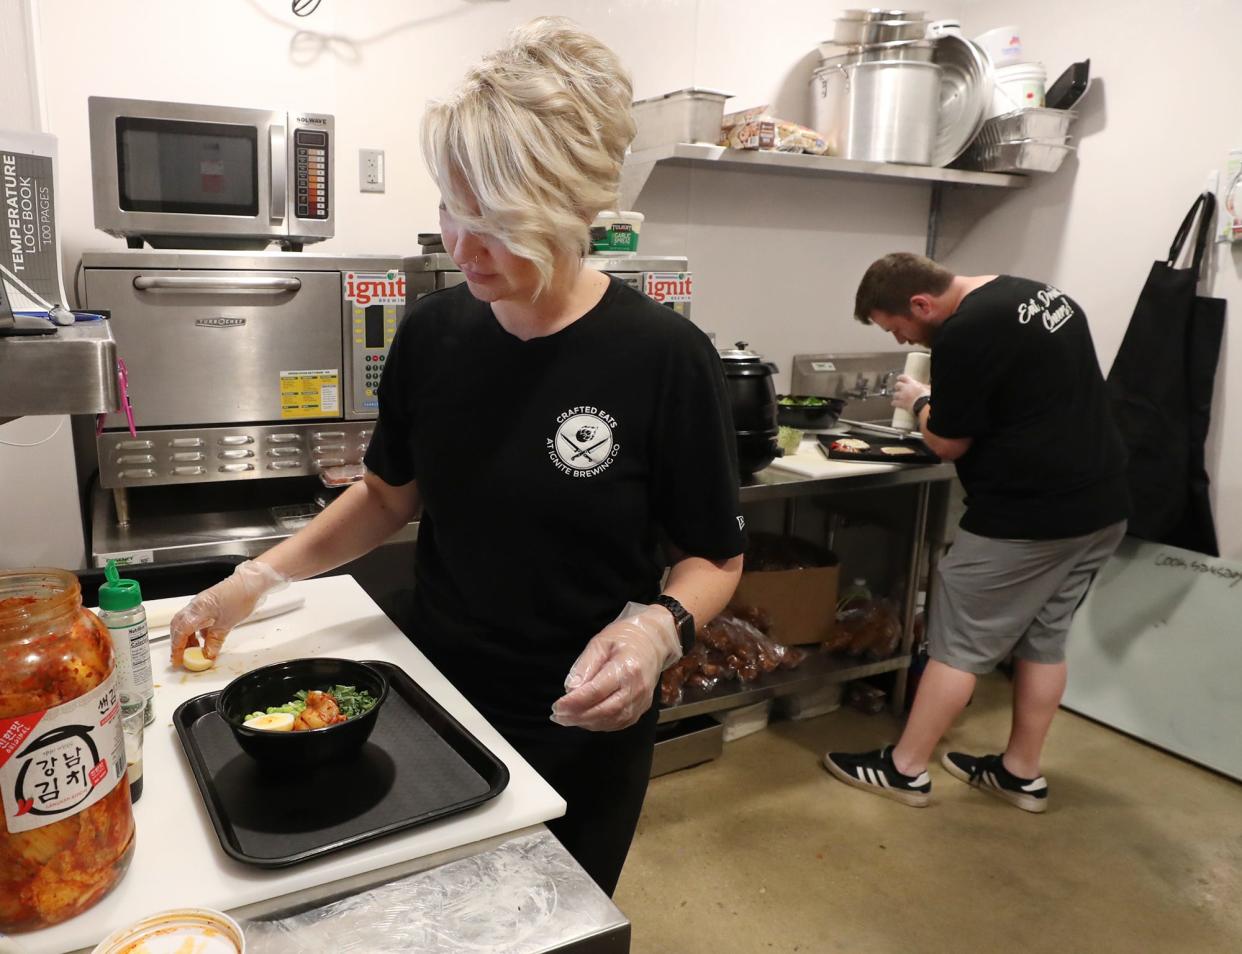 Andi Lisy of Crafted Eats at Ignite Brewing Co. puts together Ignite the Ramen, a fusion ramen bowl, in the kitchen at Ignite in Barberton on Friday as her brother John Hawkins works in the background.